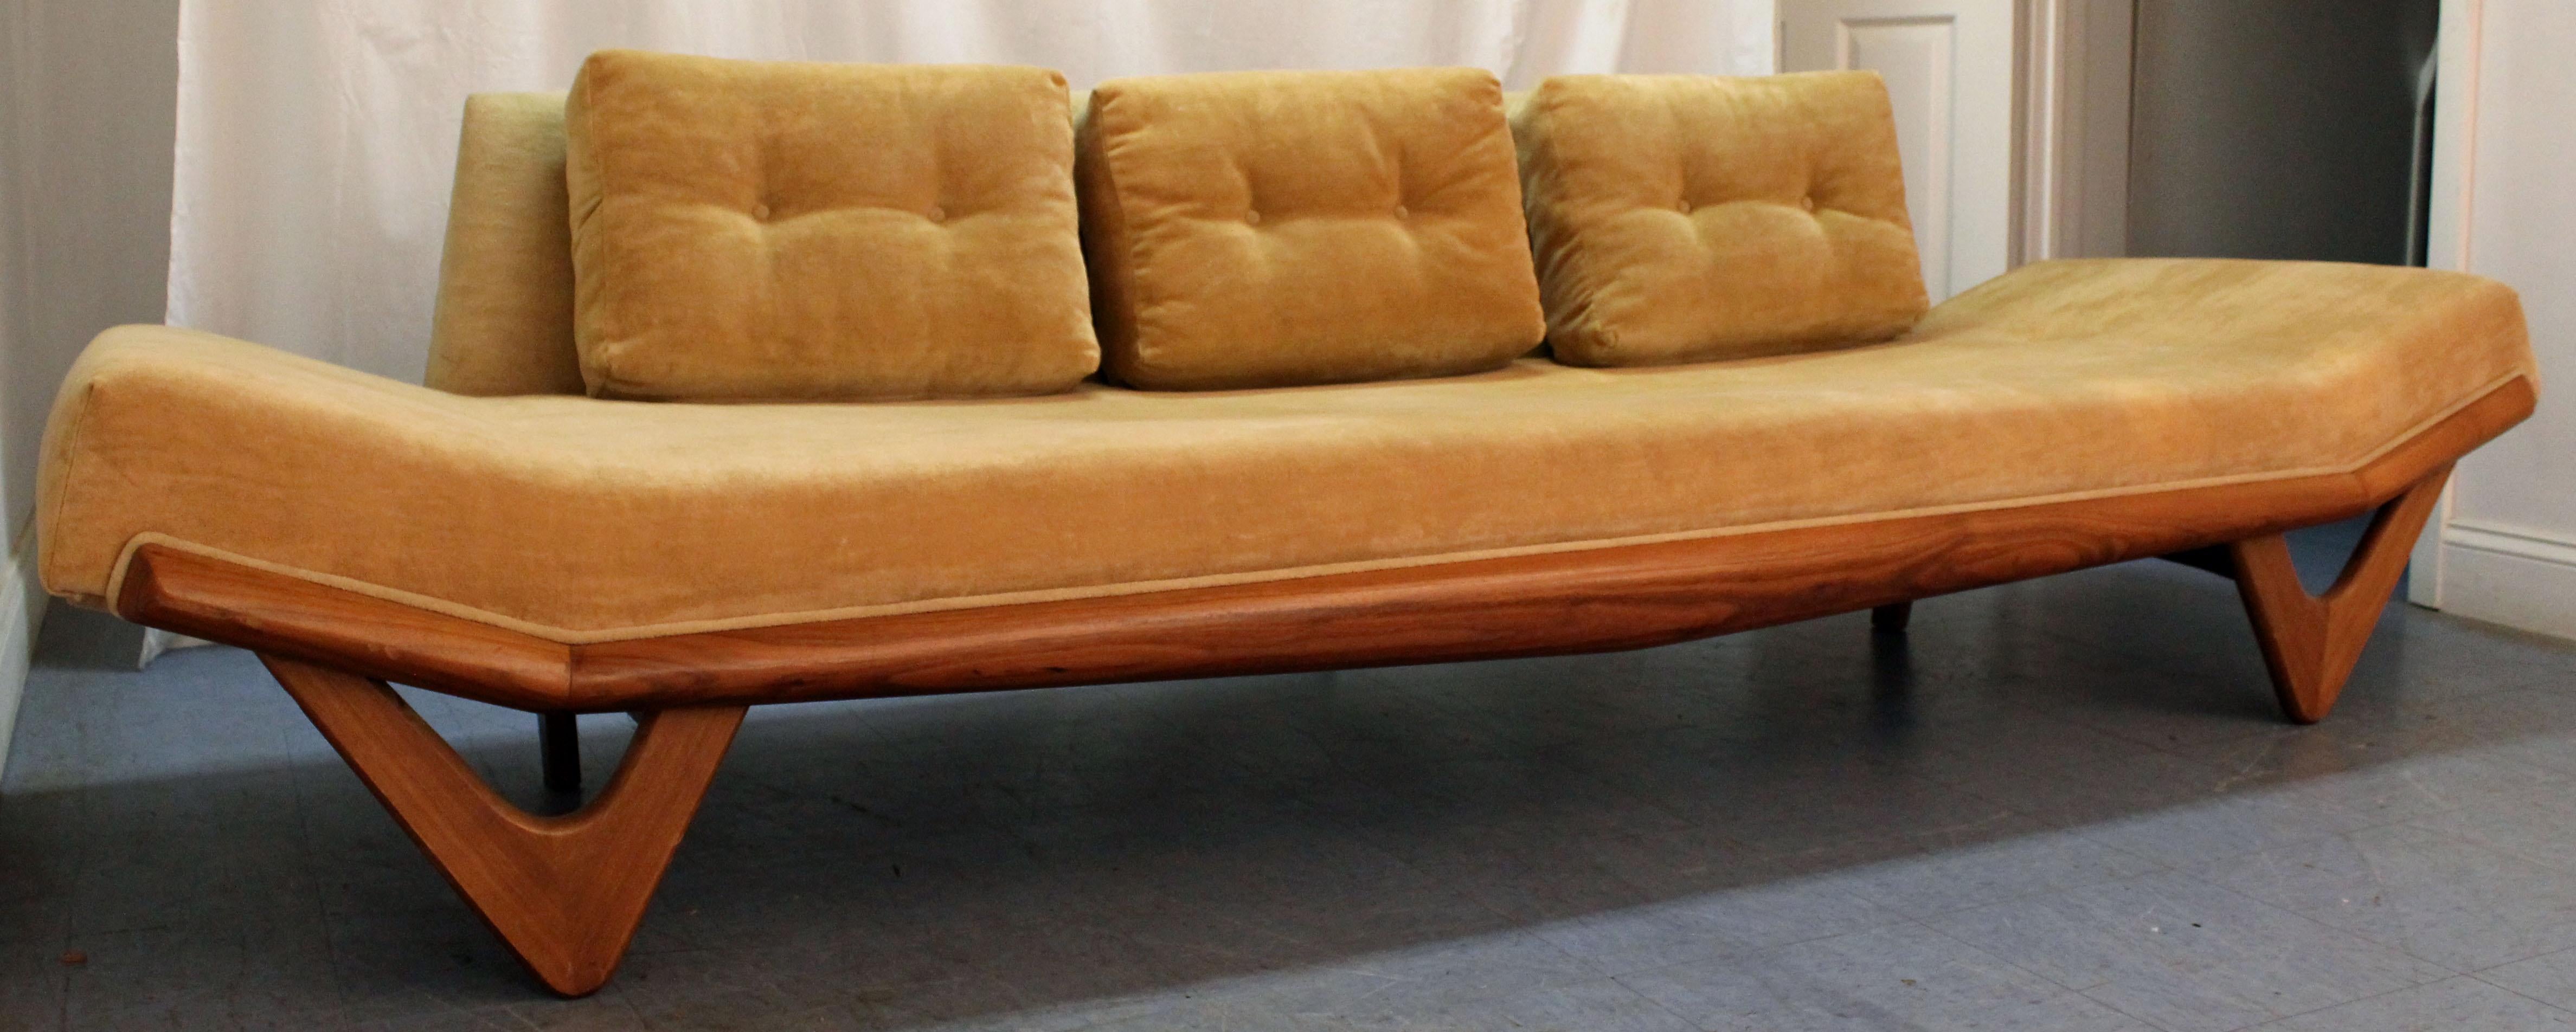 What a find. Offered is an original Adrian Pearsall 'Gondola' sofa. Features a wood base with 